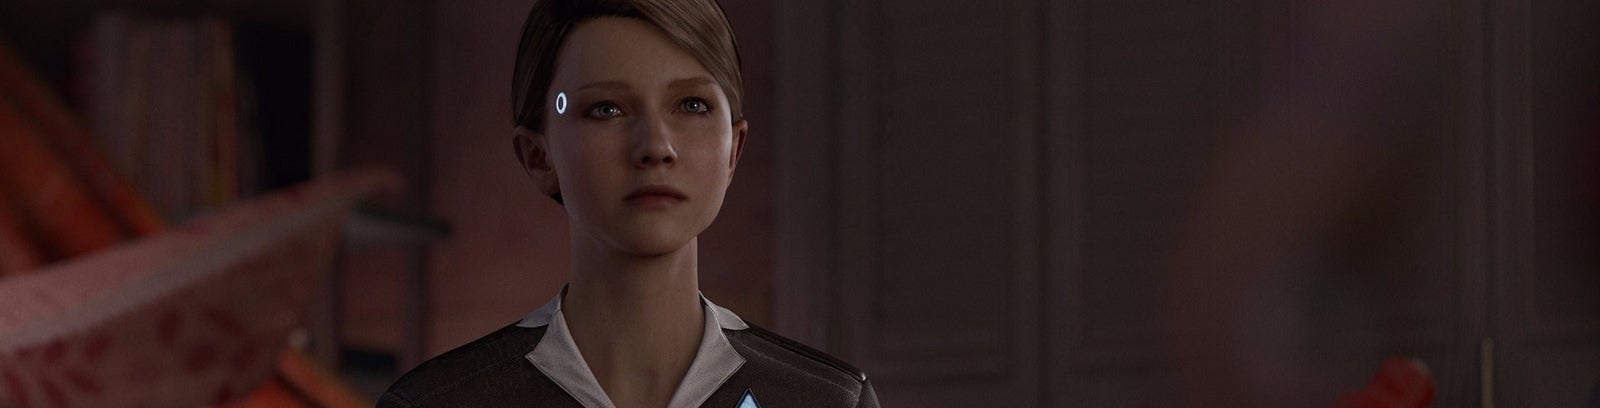 Image for David Cage on Detroit and its depiction of domestic violence